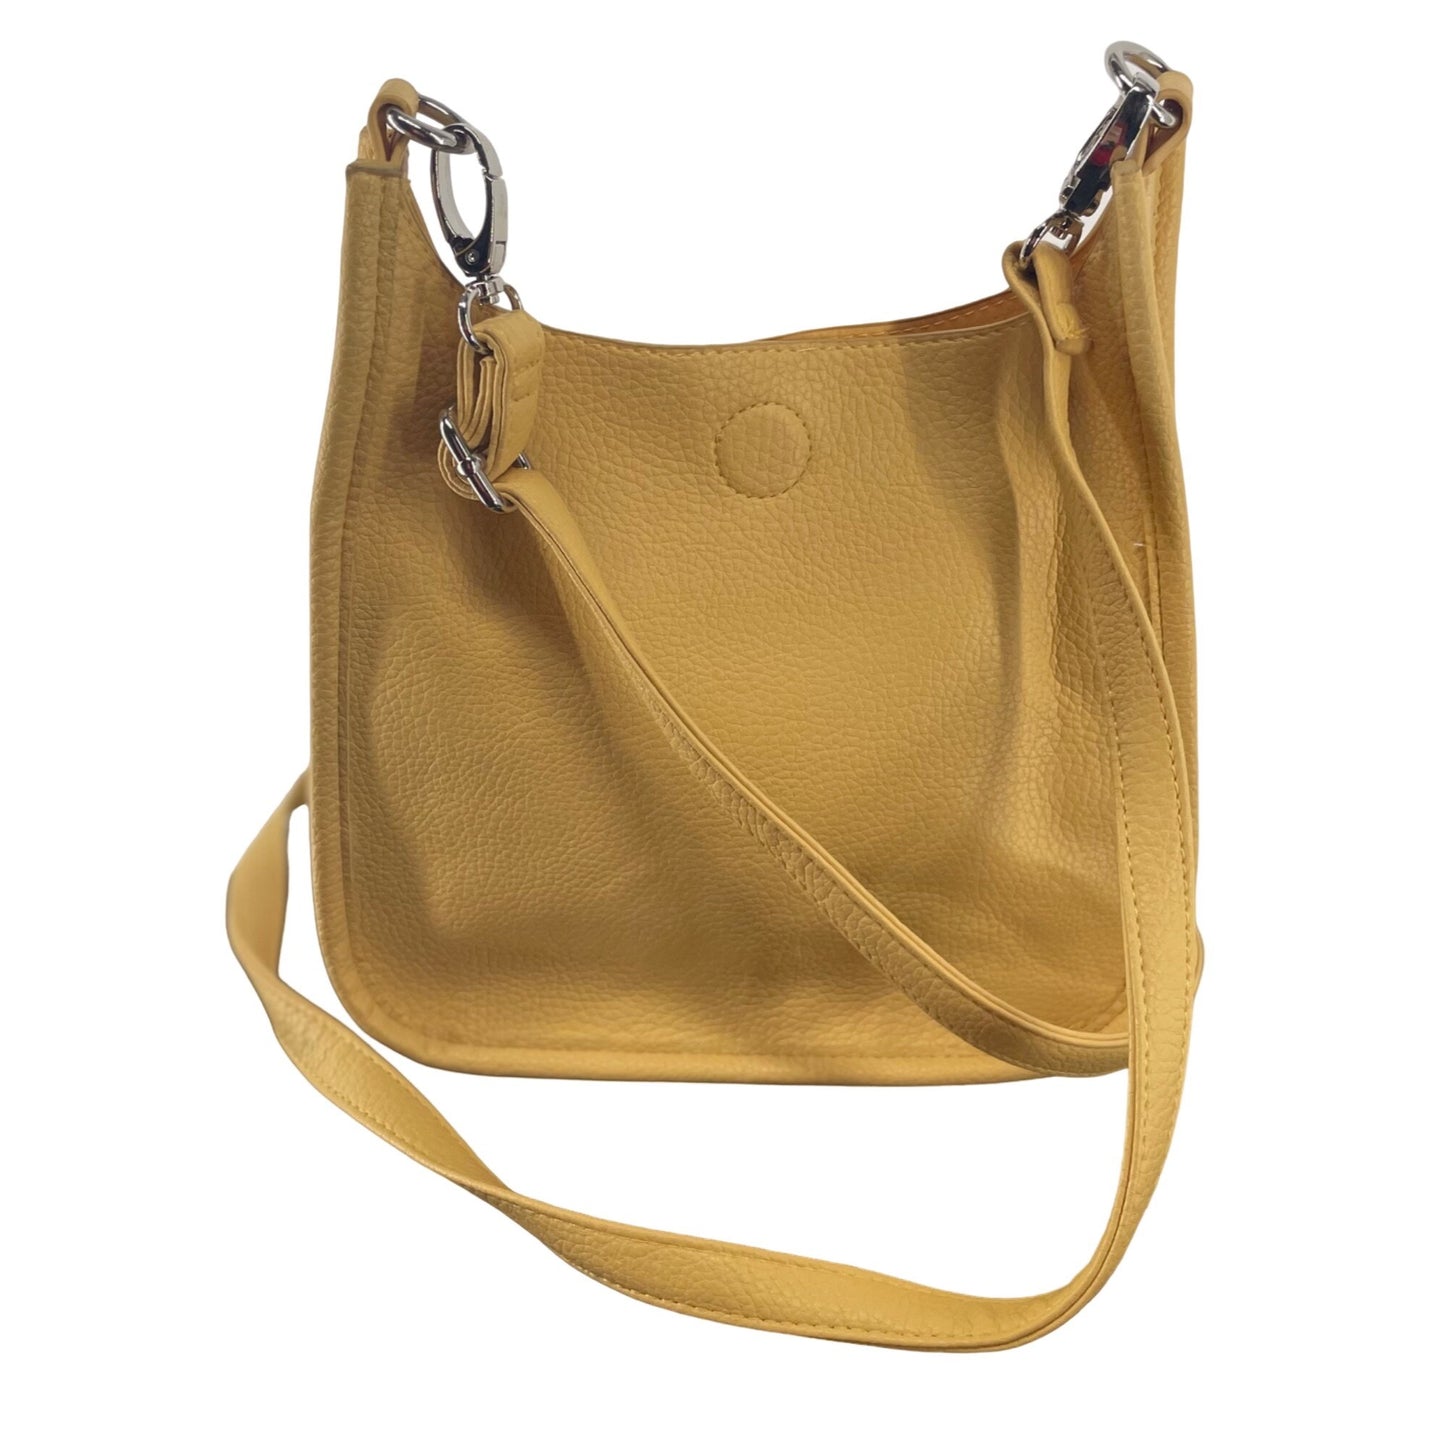 NWOT Women's Small Yellow Faux Leather Shoulder Purse